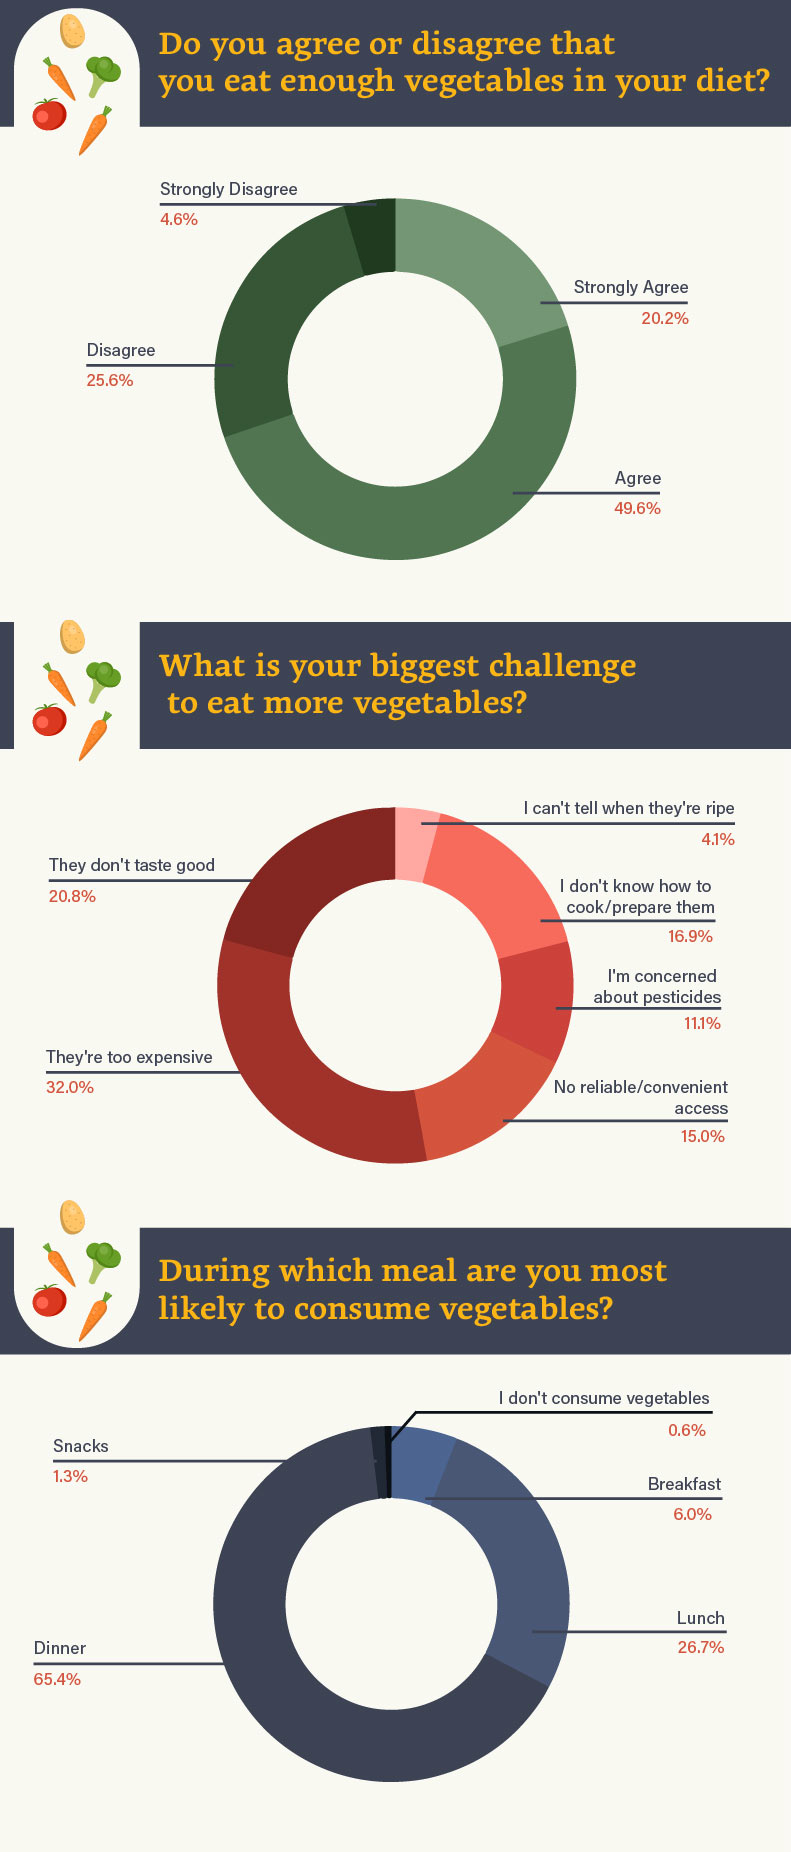 3 donut chart charts depicting the answers to if people think they get enough vegetables in their diet, the biggest challenge they face in eating vegetables, and which meal they’re most likely to consume vegetables.